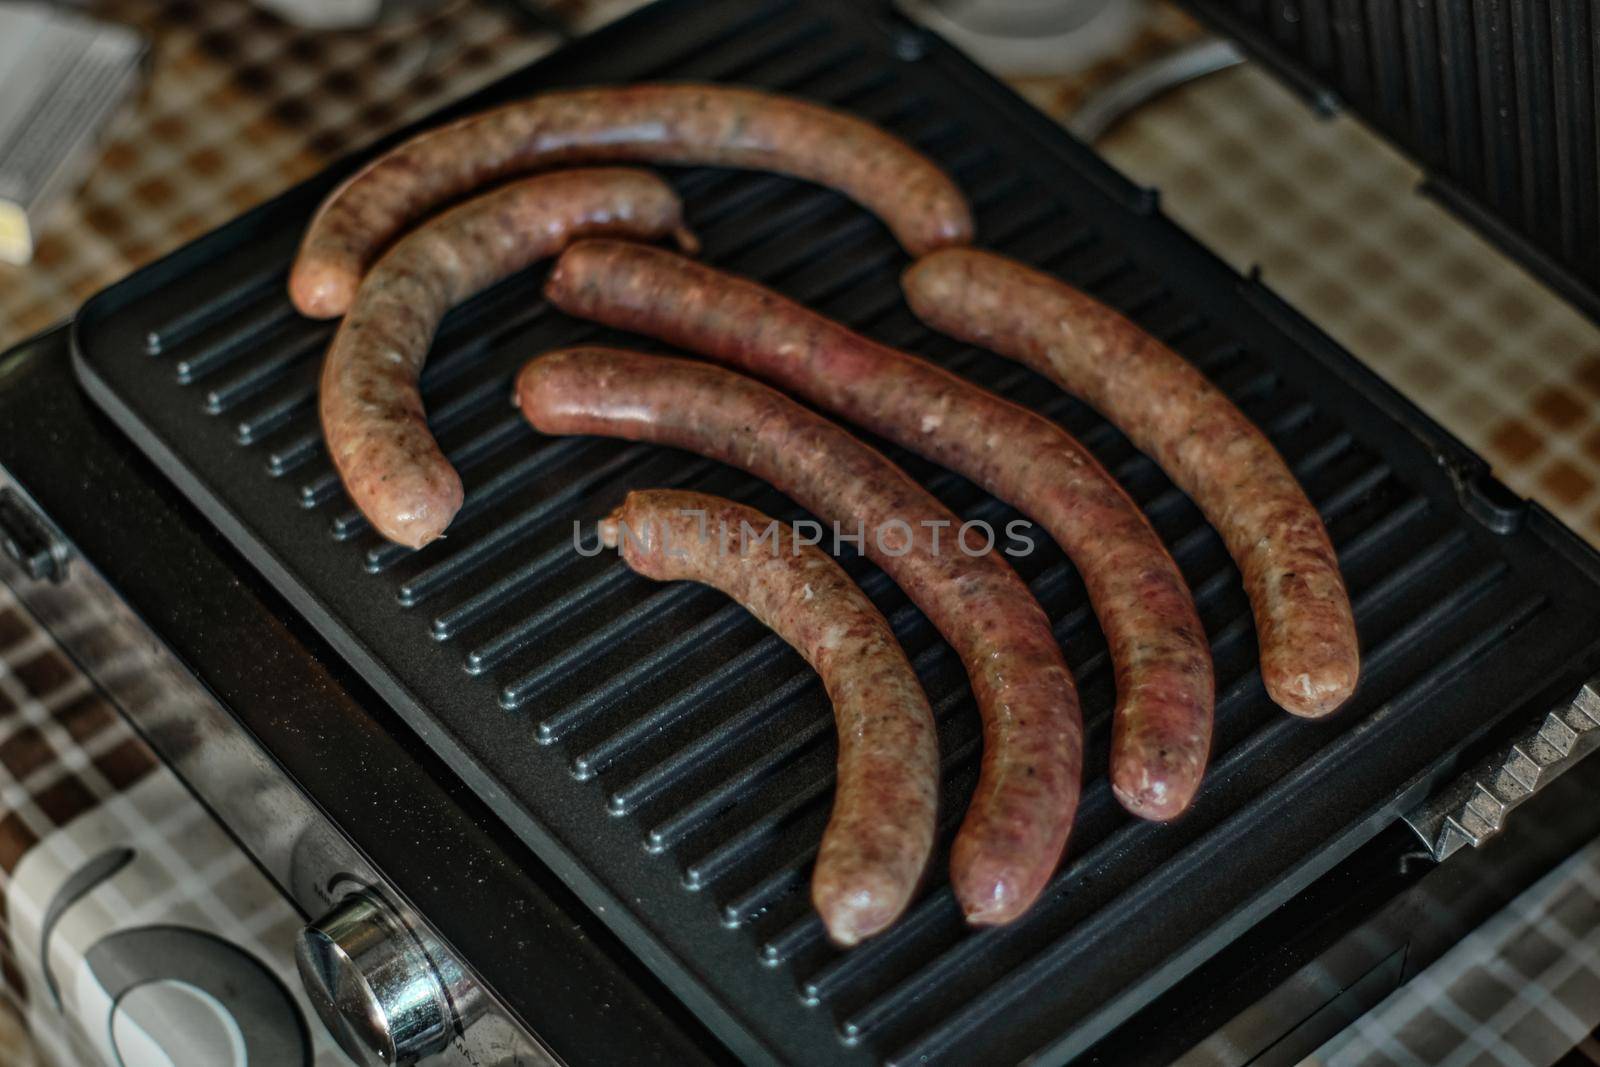 Grilled raw sausages are cooked by snep_photo